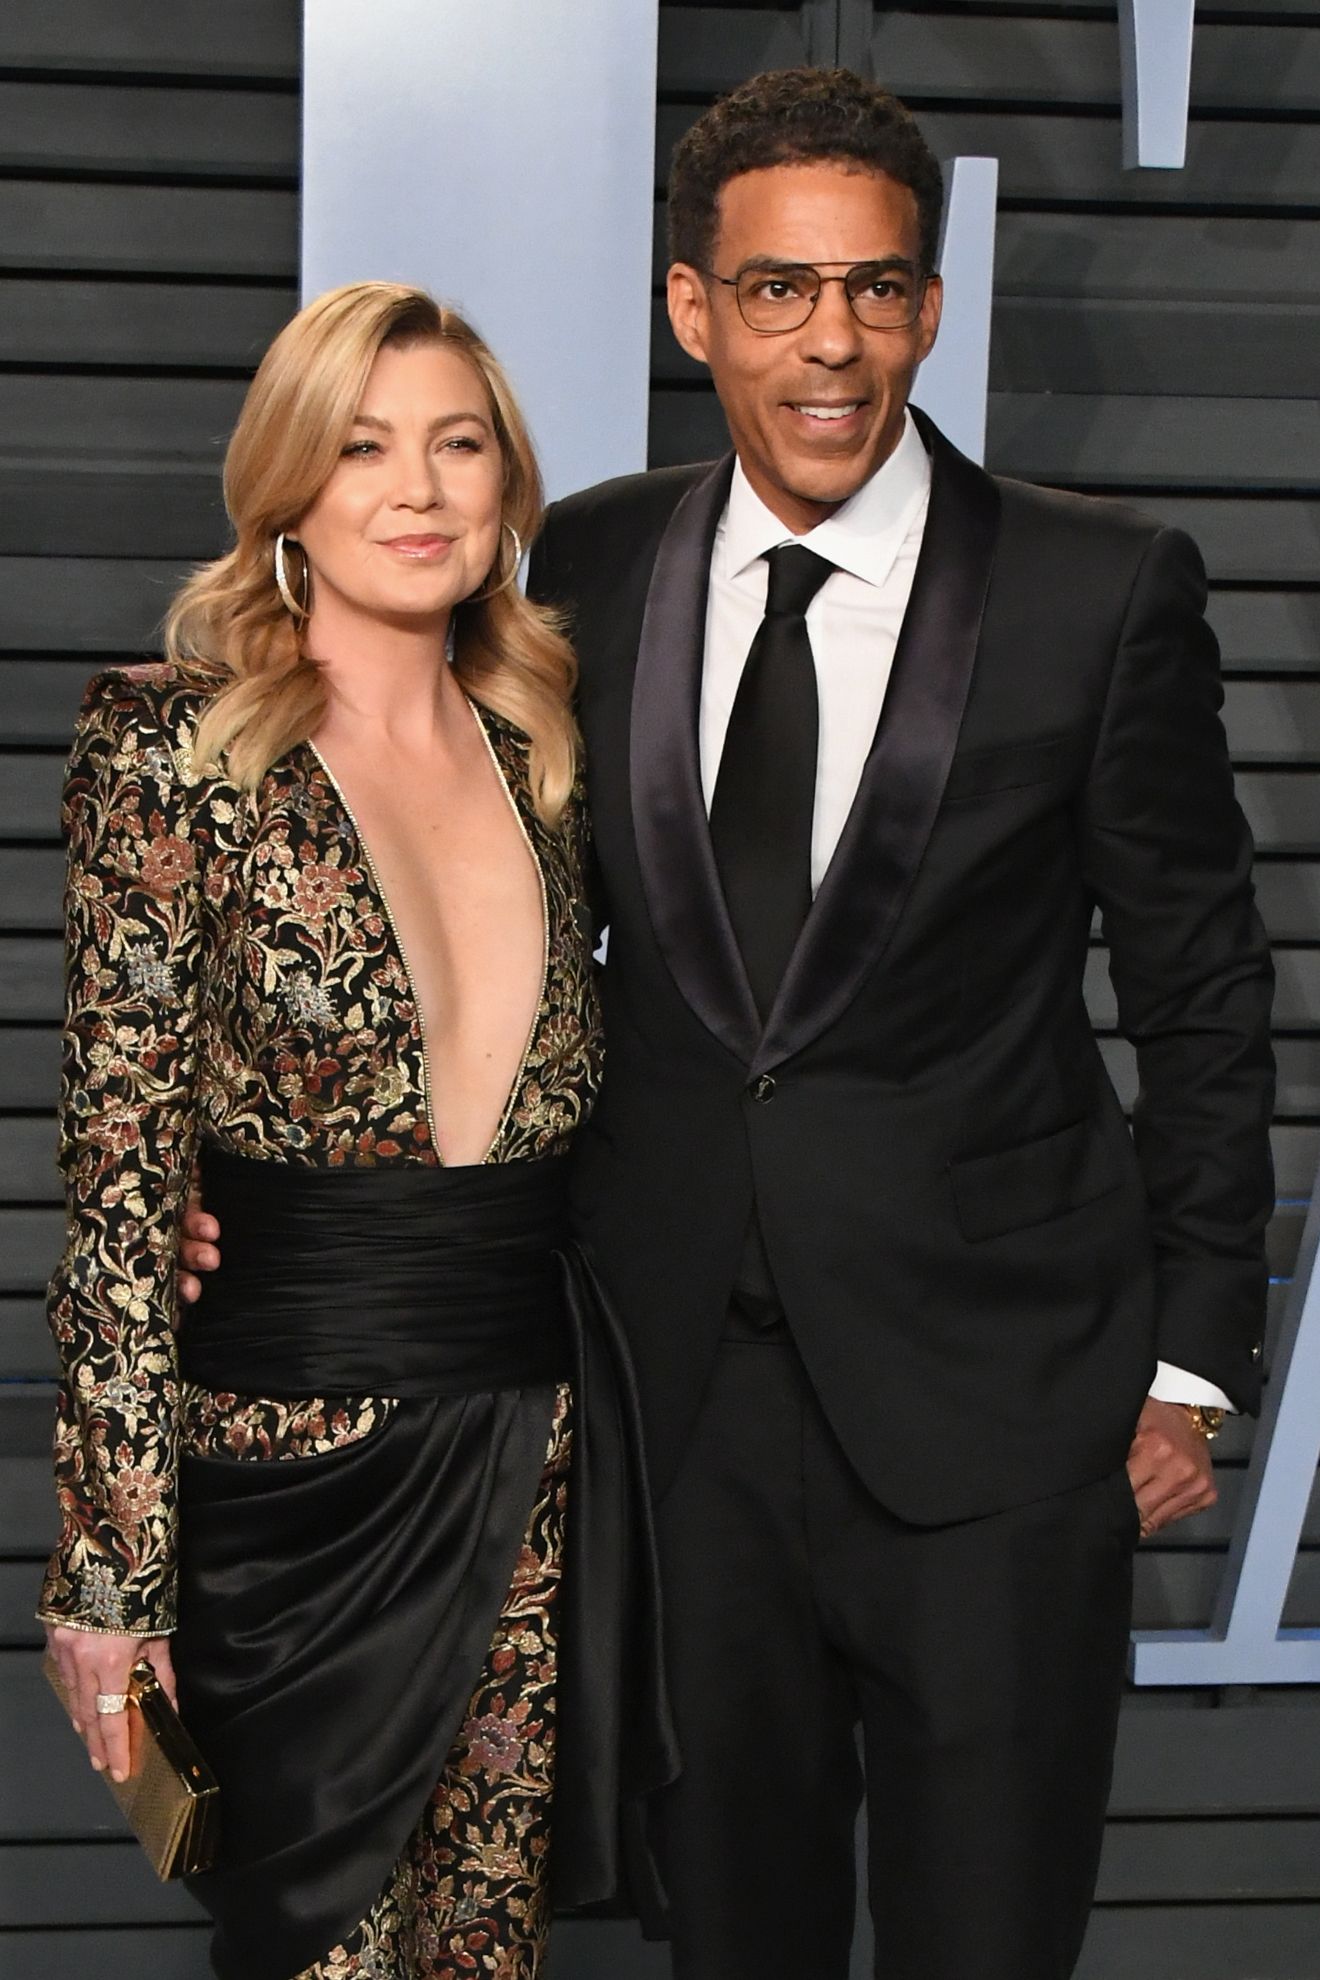 Ellen Pompeo Husband & Kids - All About the 'Grey's Anatomy' Star's Family